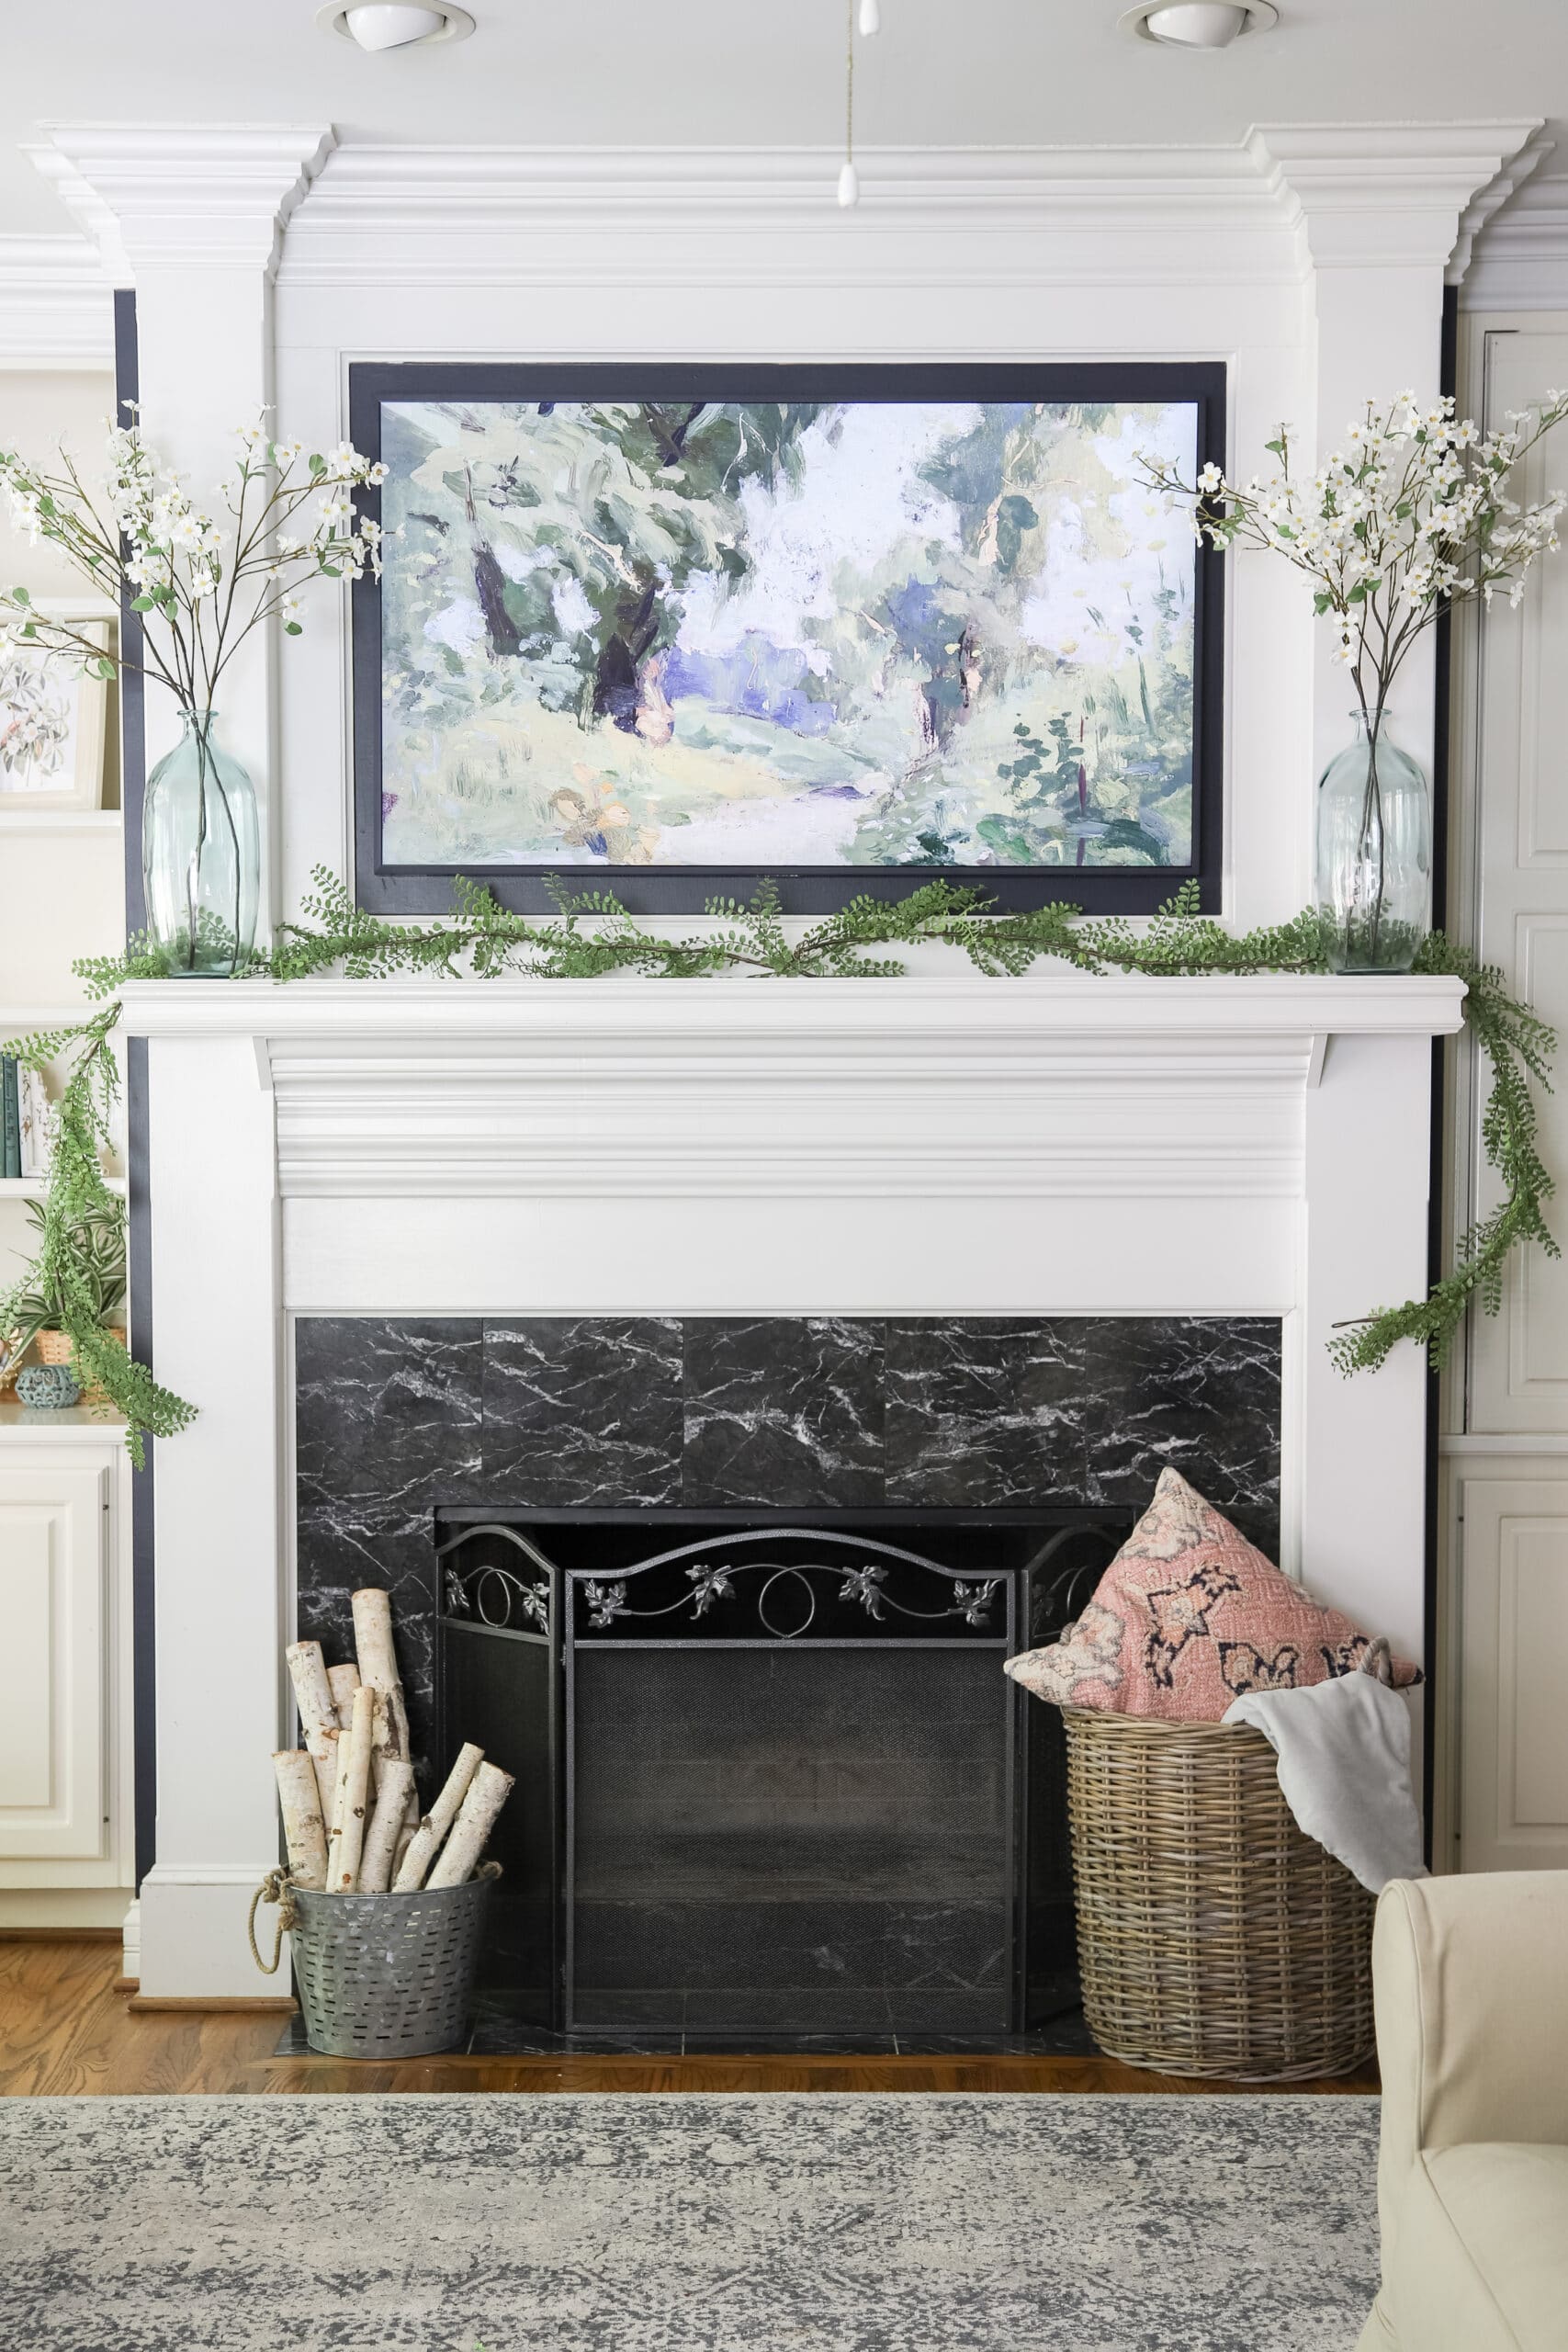 mounted Frame TV above fireplace mantle in living room